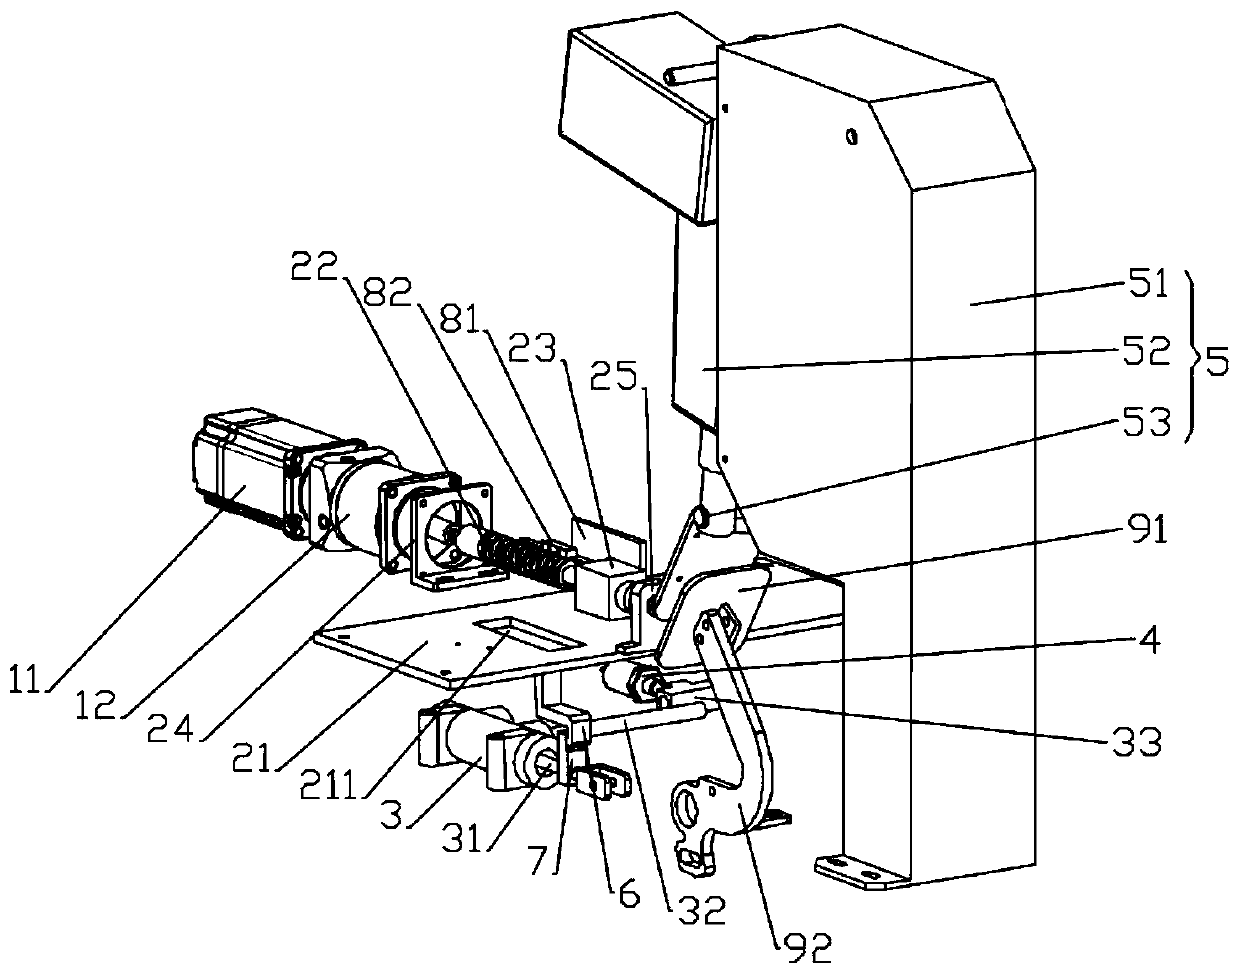 Motor-controlled linear control brake device for unmanned vehicle